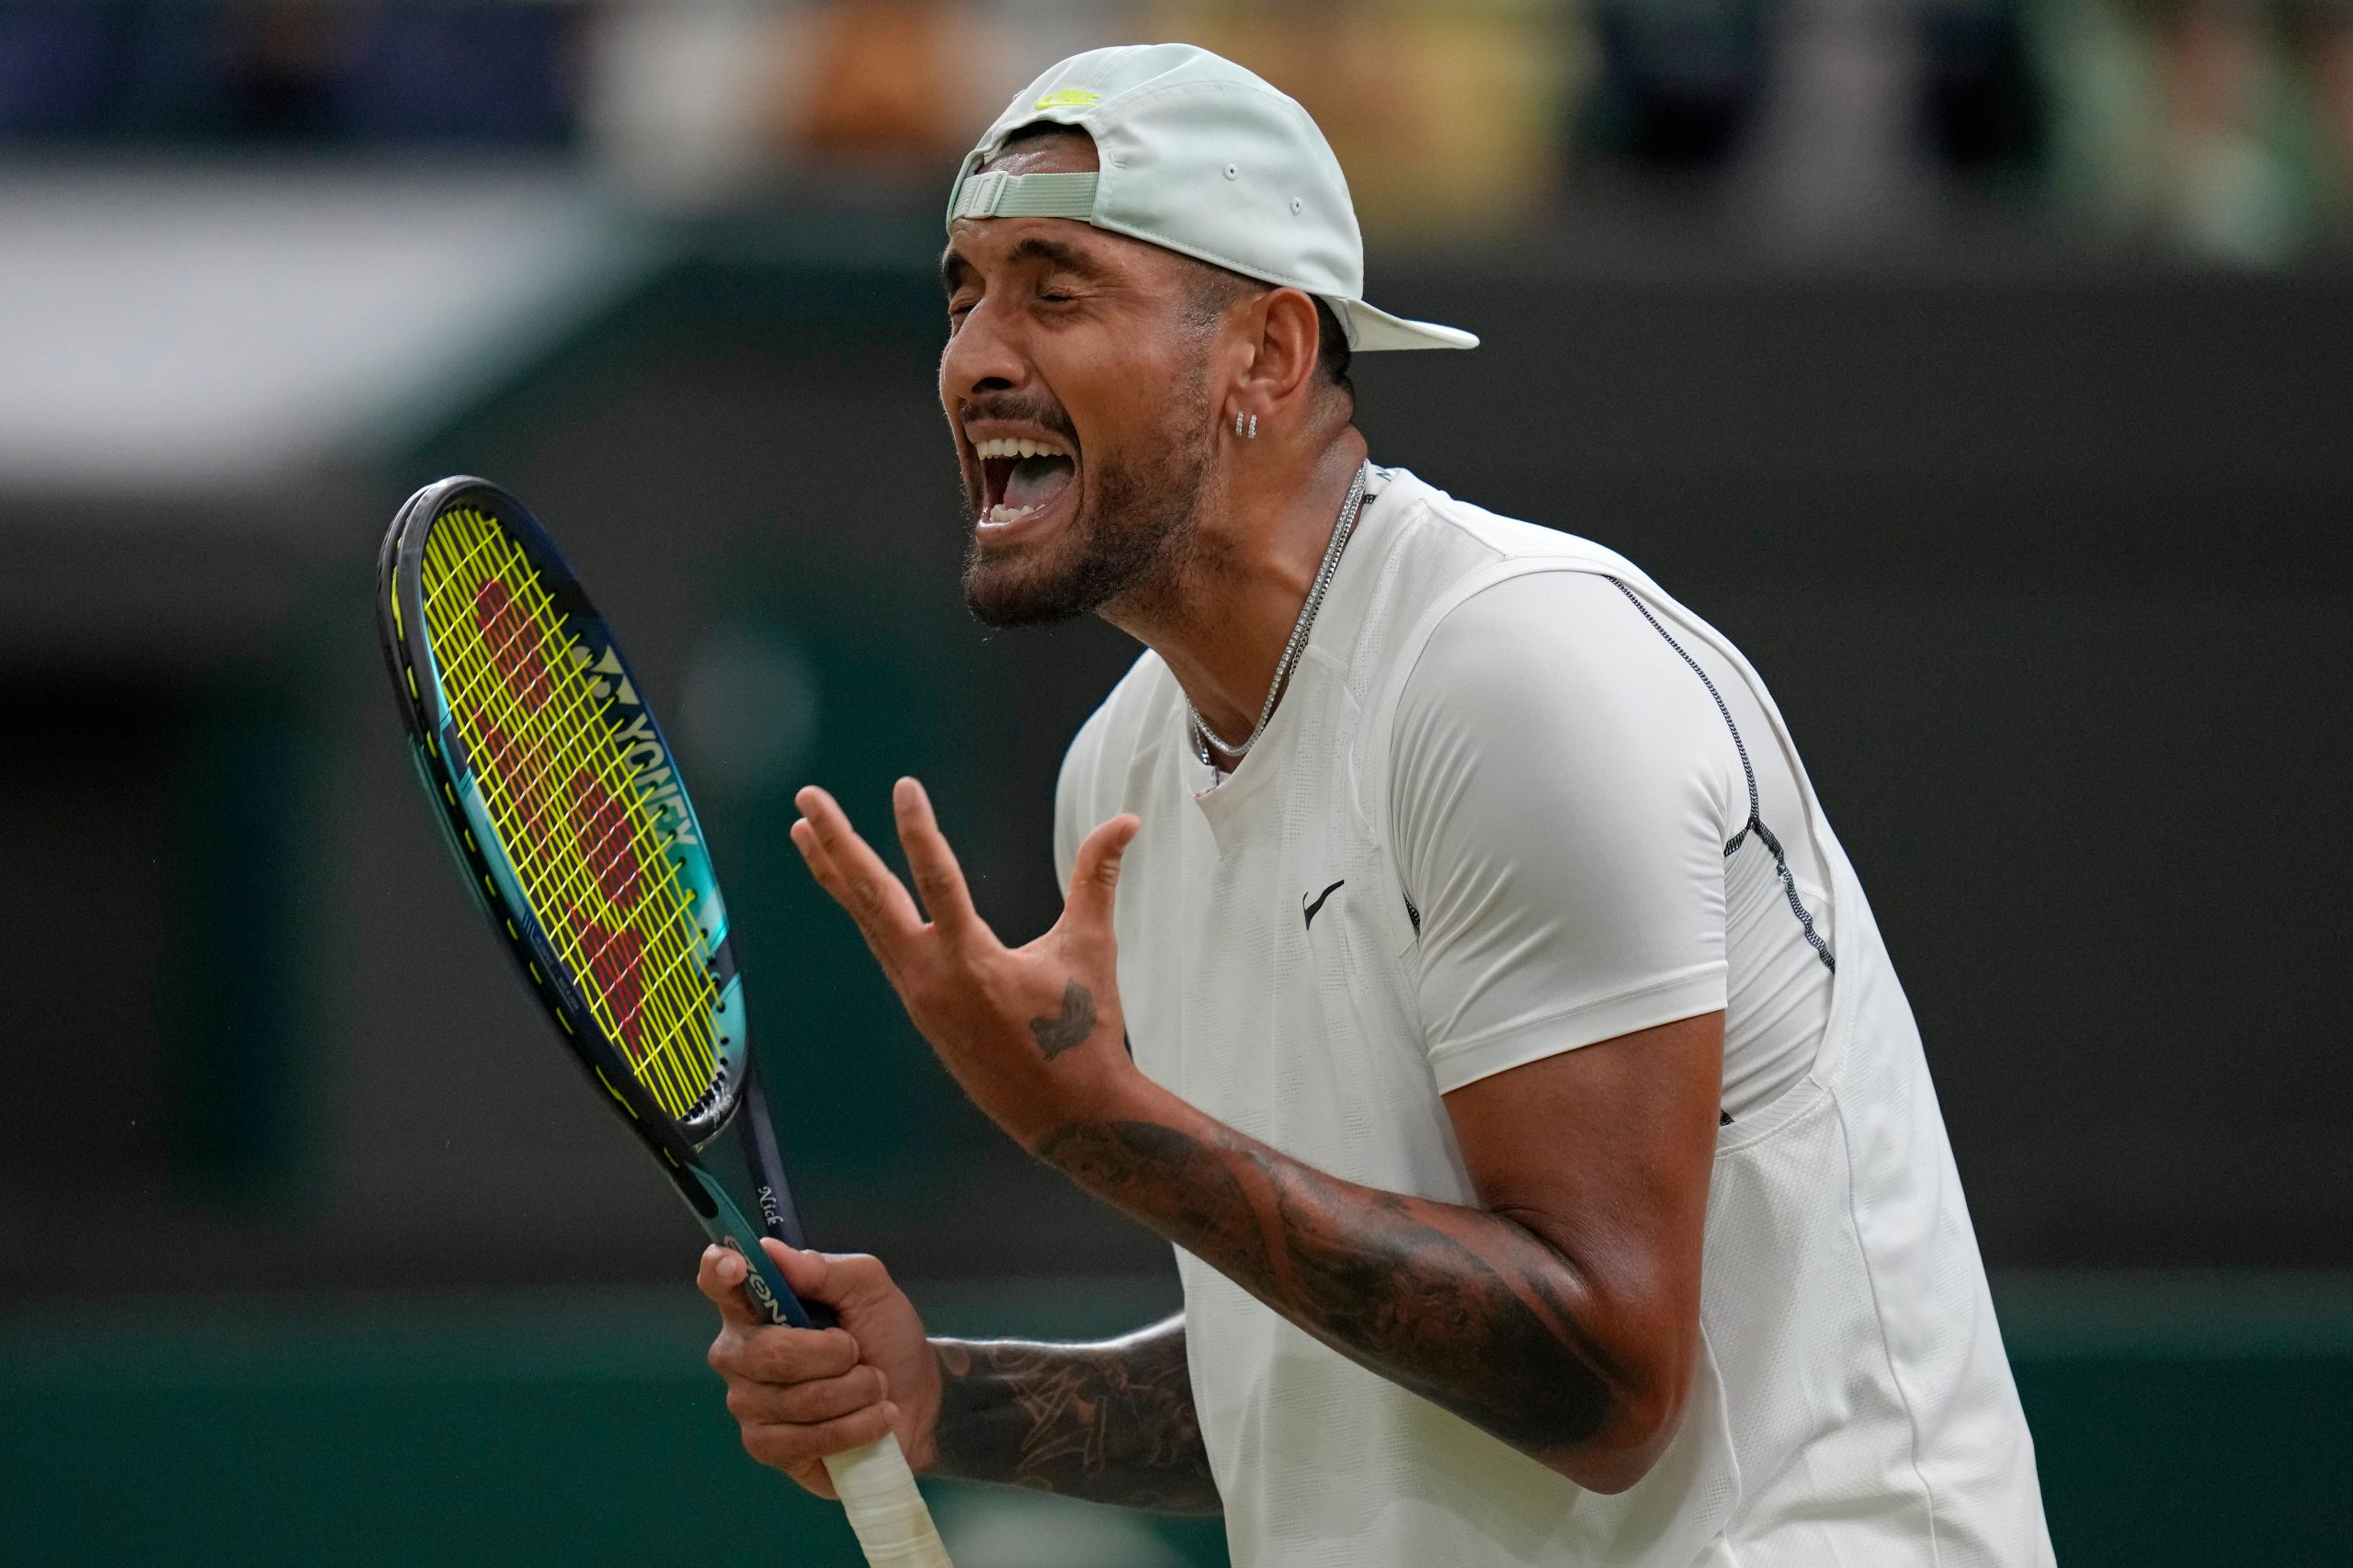 Wimbledon 2022: Nadal, Kyrgios, Halep to take Centre Court on Day 8